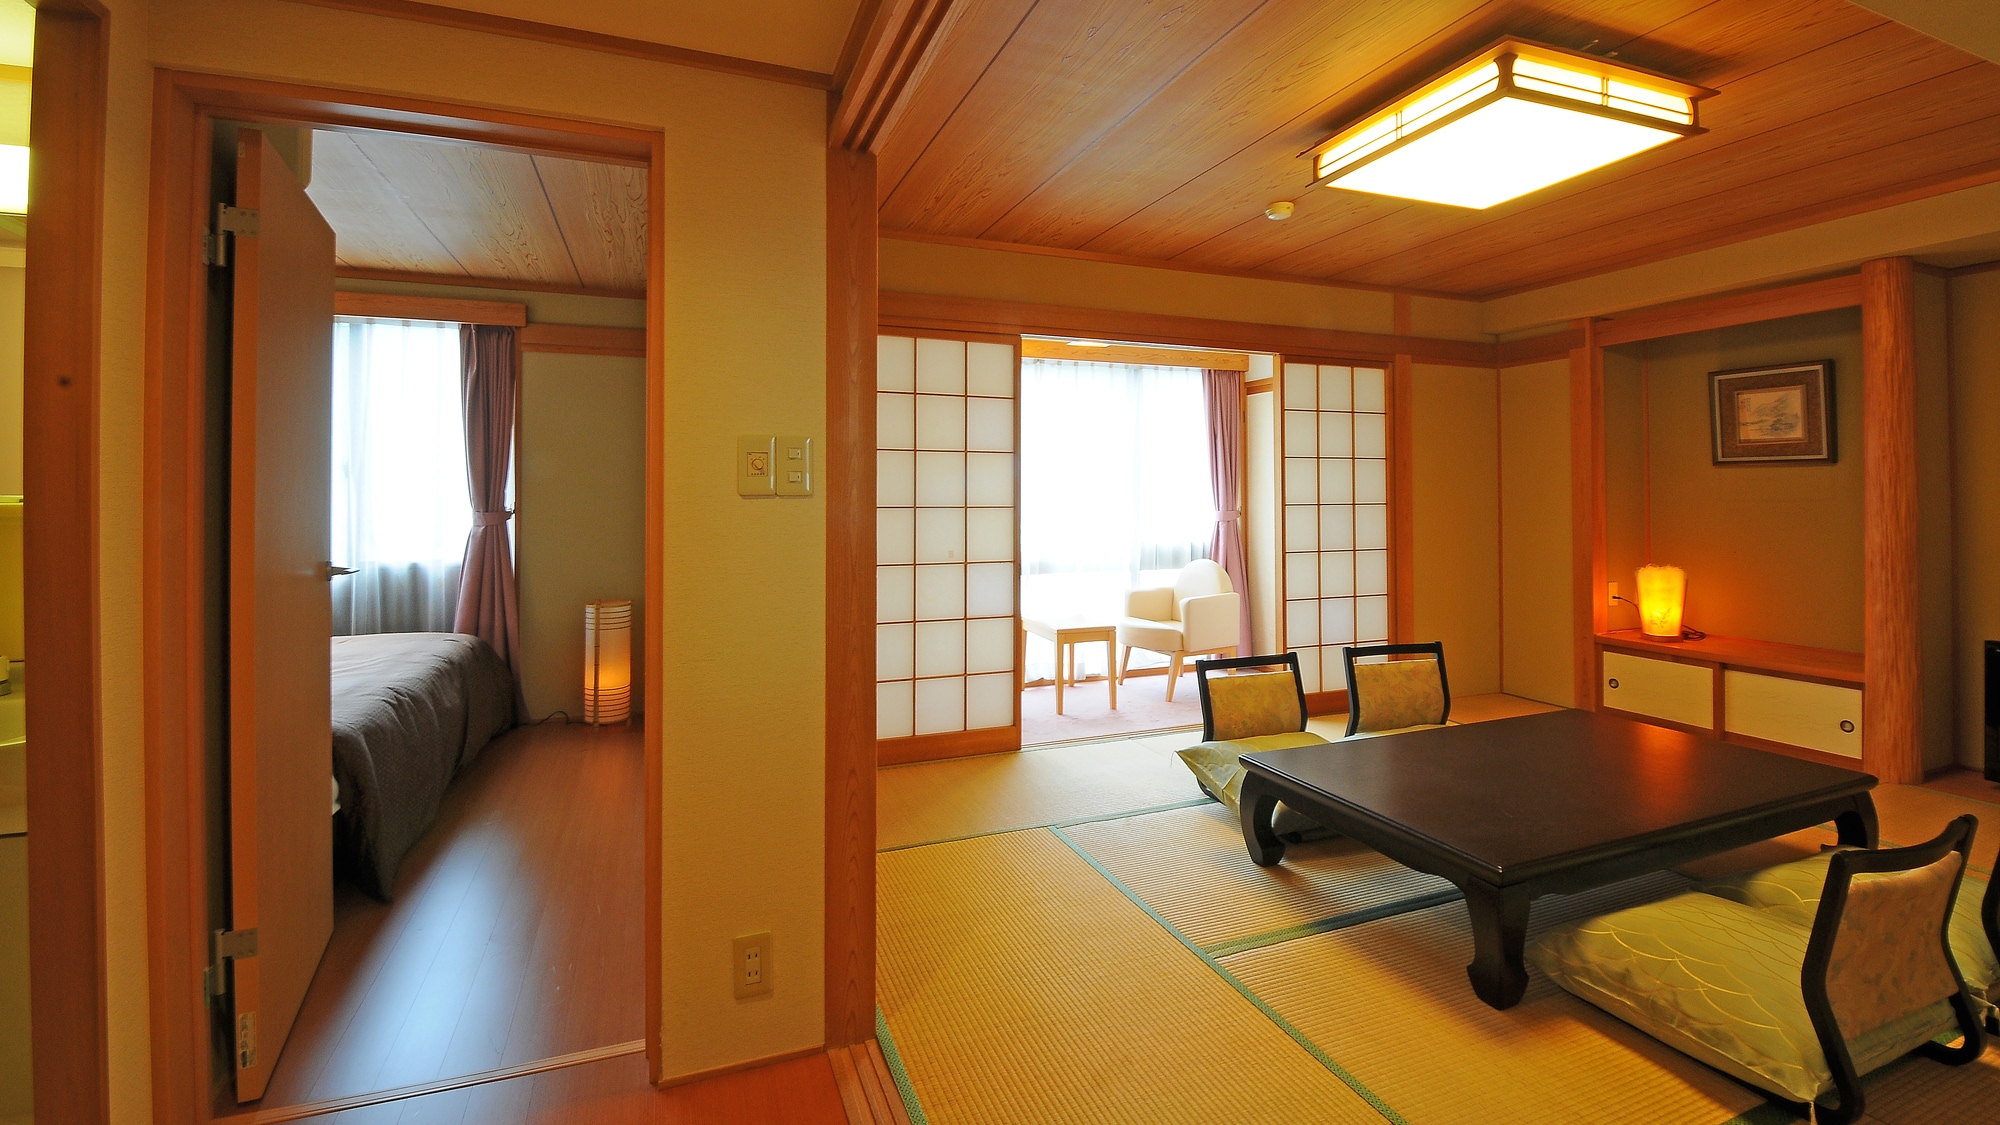 An example of a Japanese and Western room